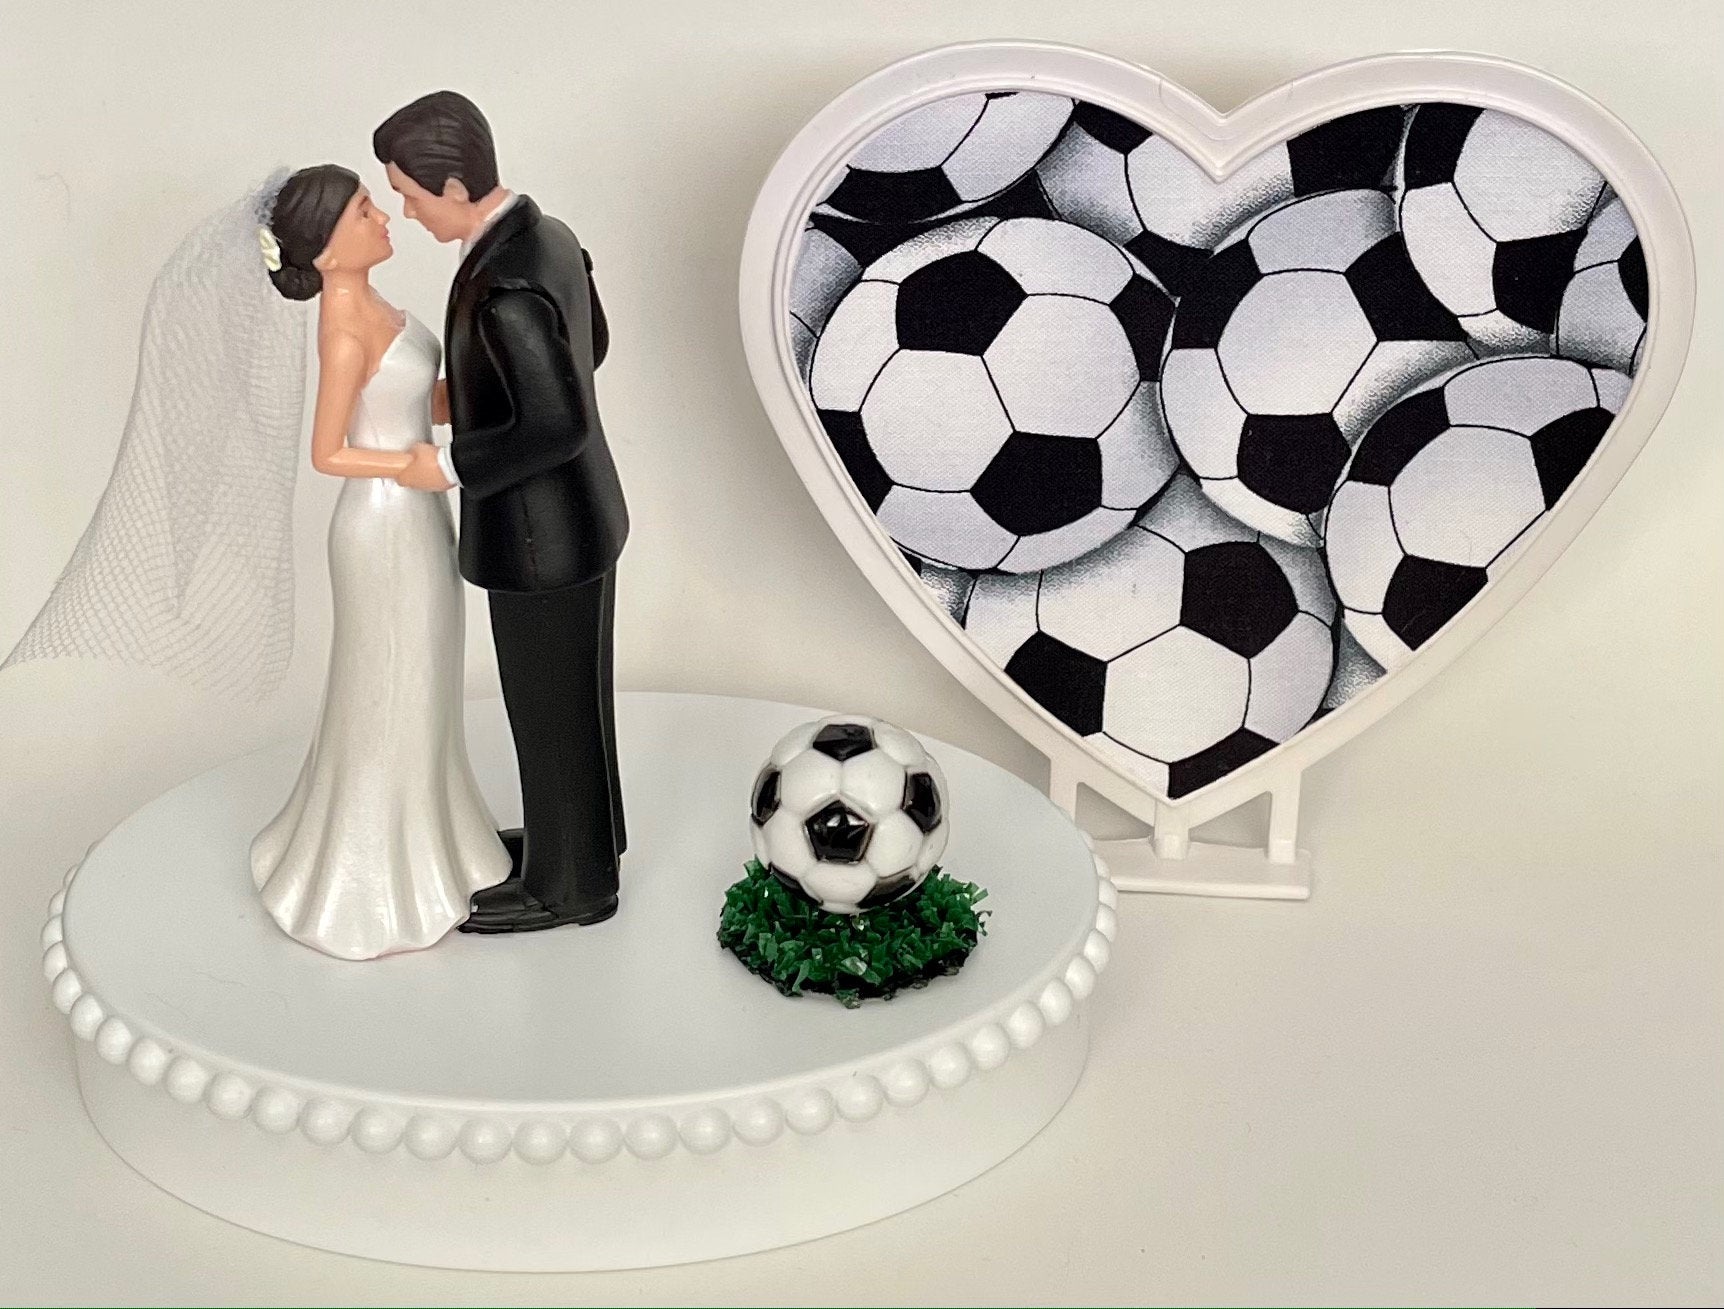 Wedding Cake Topper Soccer Themed Sports Fans Ball Turf Pretty Short-Haired Bride and Groom One-of-a-Kind Bridal Shower Reception Gift Idea